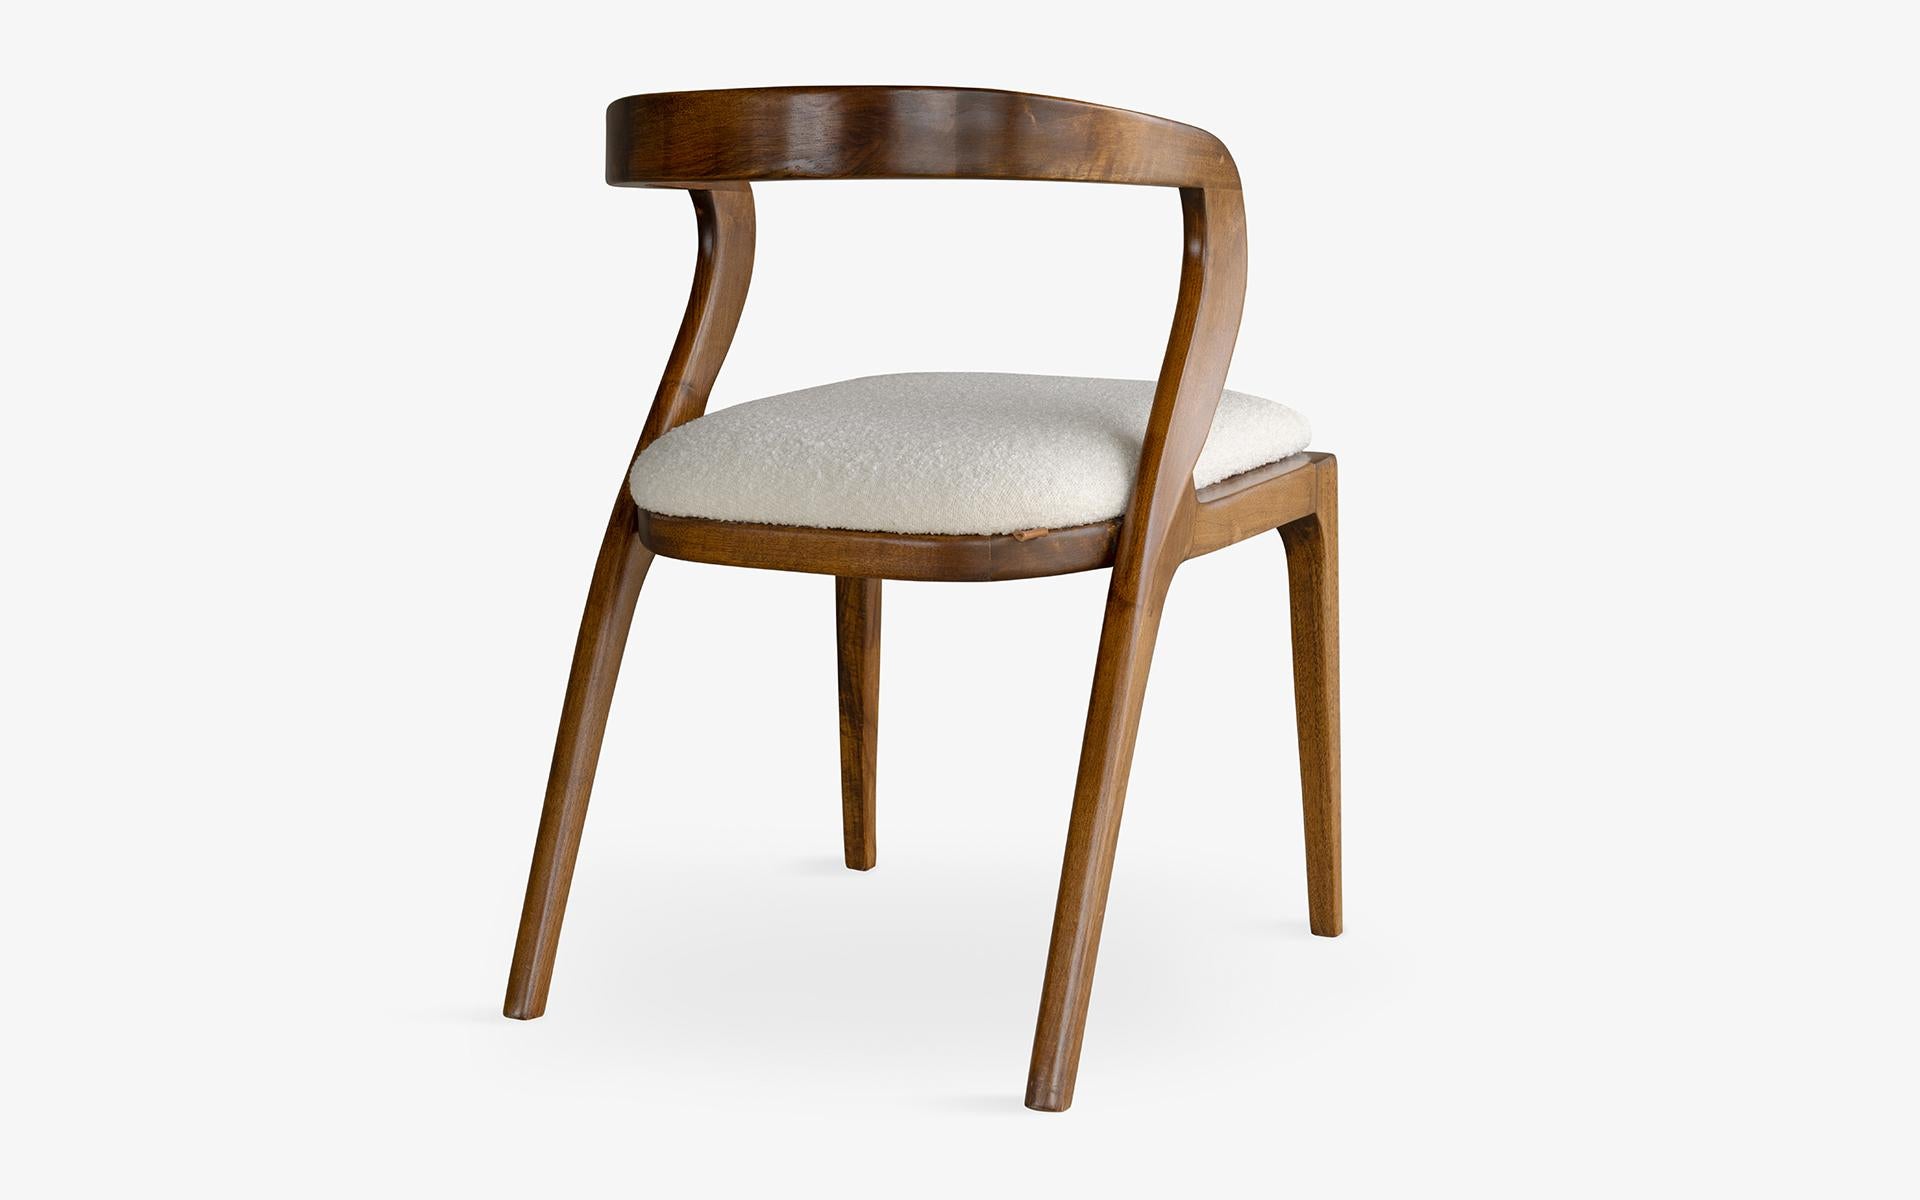 Modern Nana Wooden Dining Chair, No:1, Lagu Selection For Sale